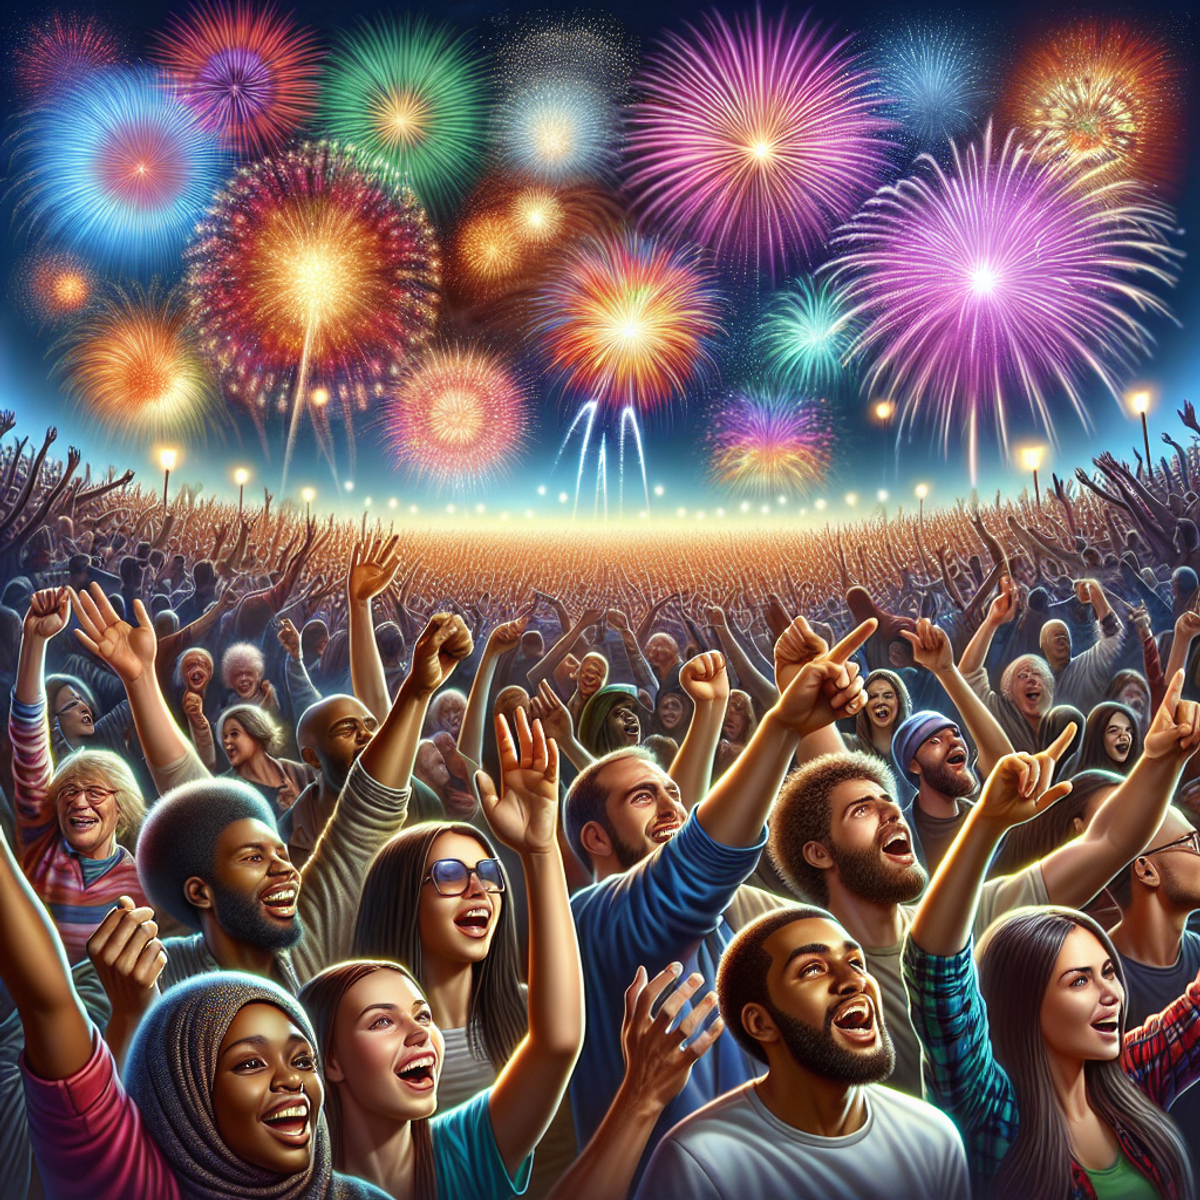 A diverse crowd cheering with colorful fireworks in the background.